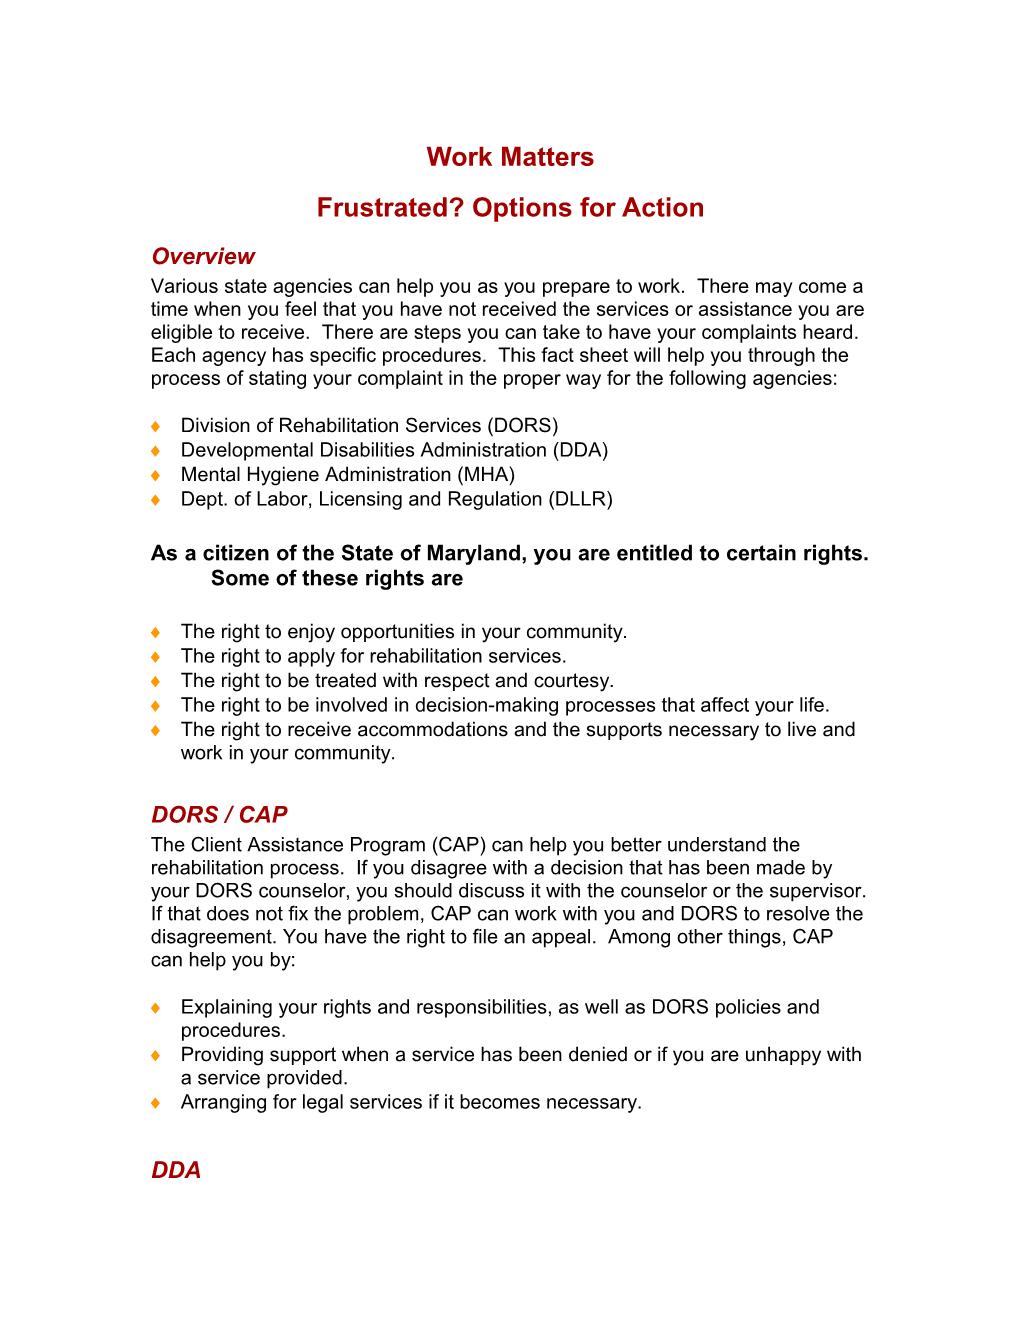 Frustrated? Options for Action